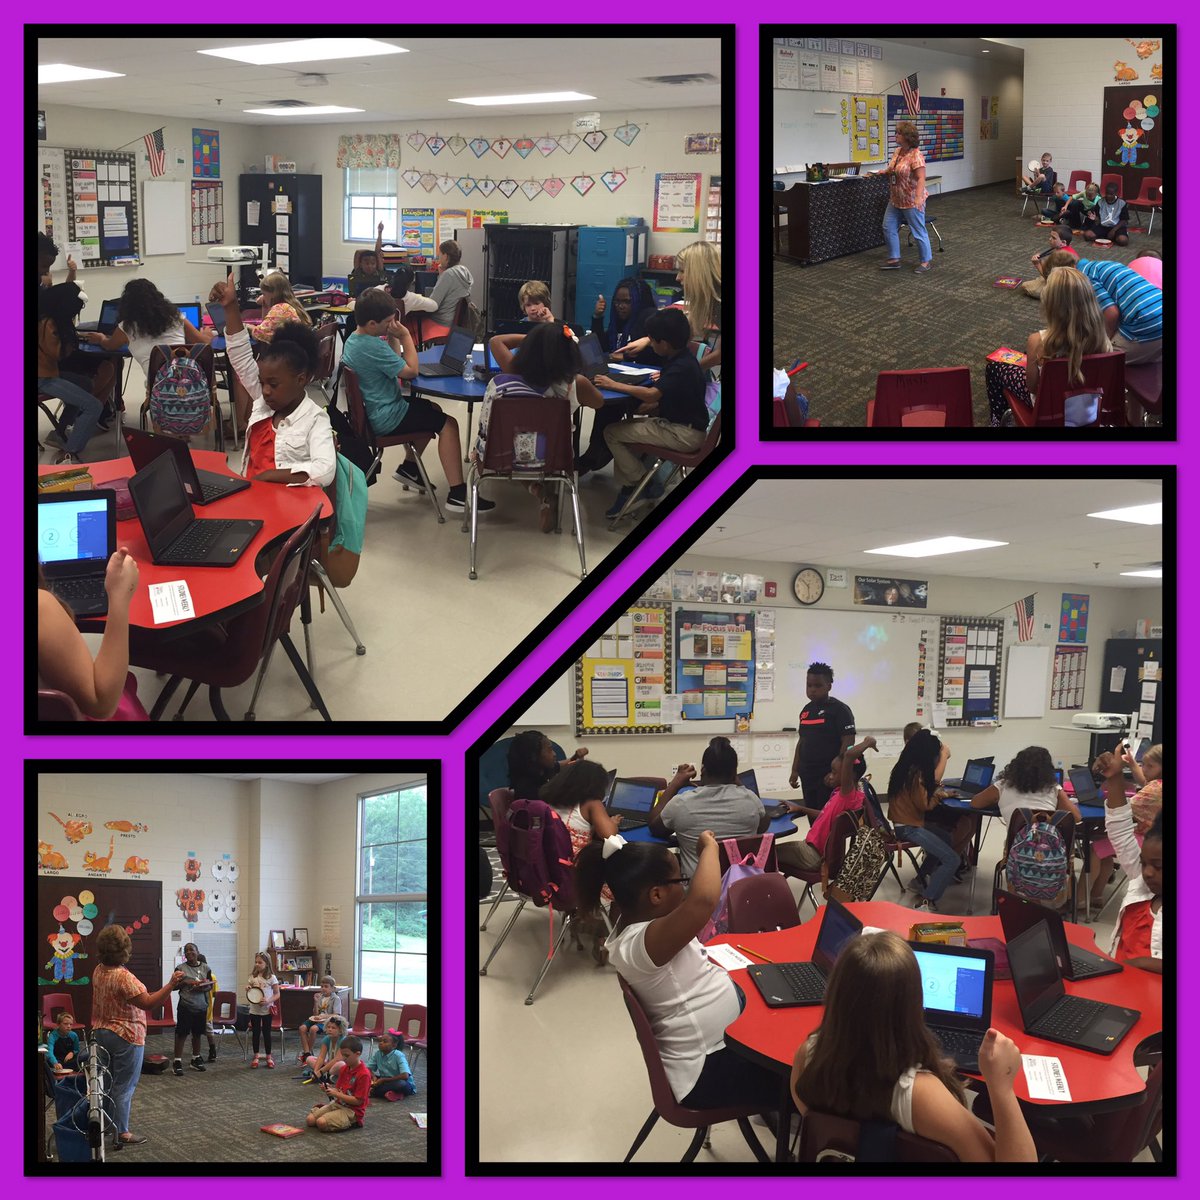 Just another EXTRAordinary day in Mustang City! #F5 #21stCenturyClassrooms #BCEStrong #Music #Technology